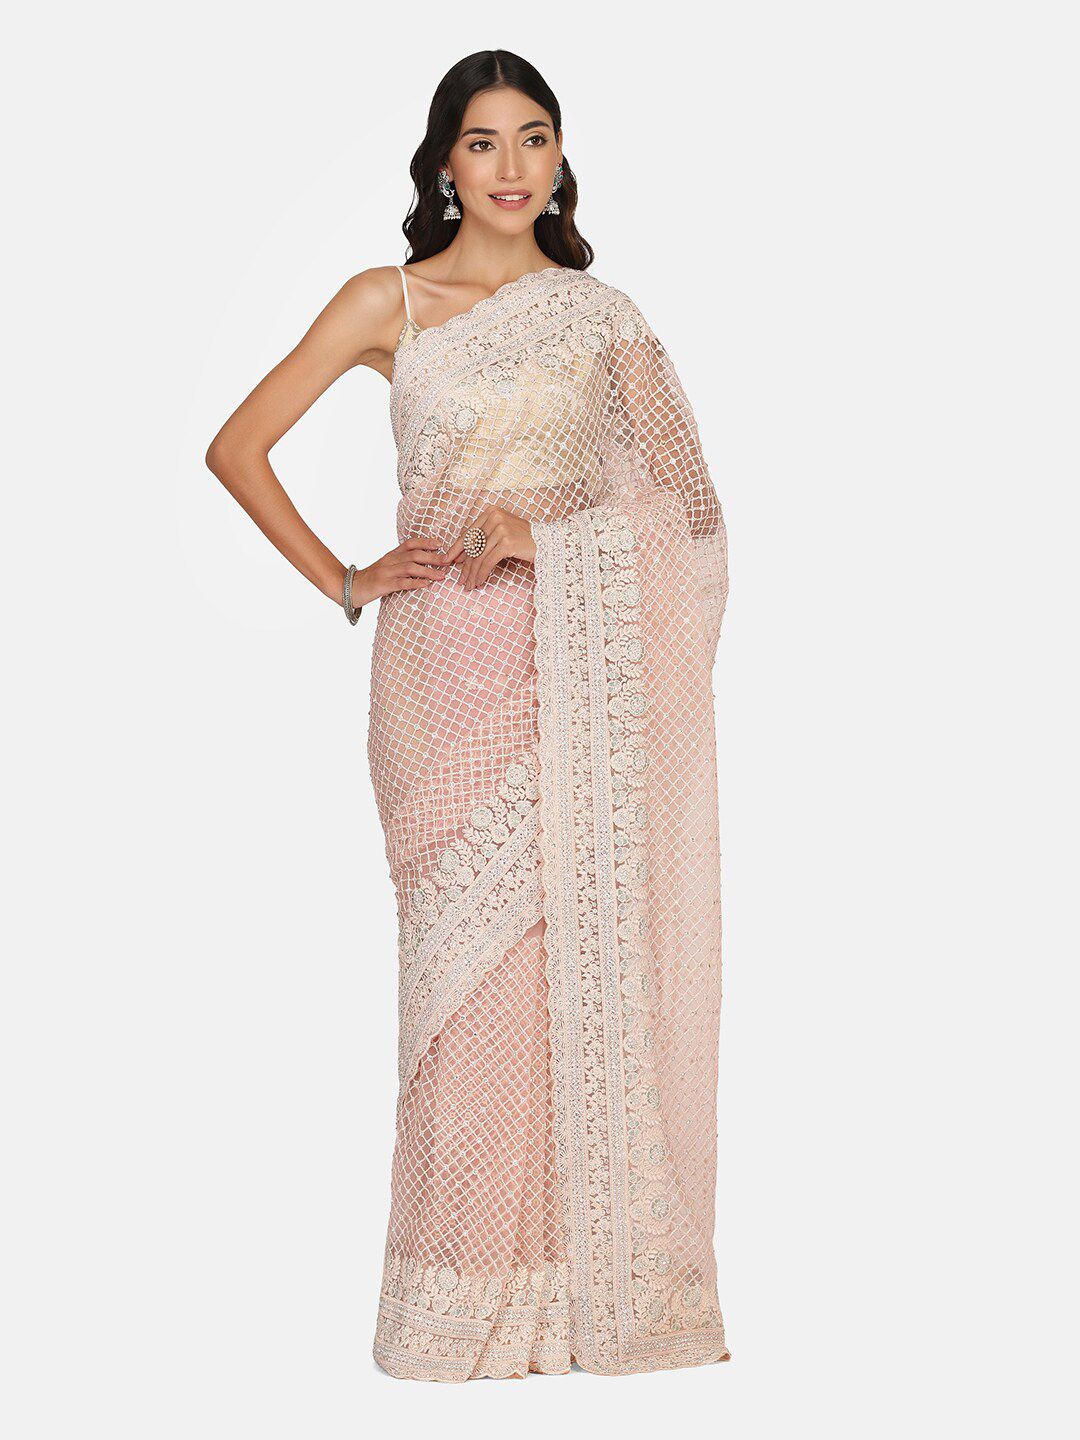 BOMBAY SELECTIONS Pink & White Beads and Stones Net Saree Price in India